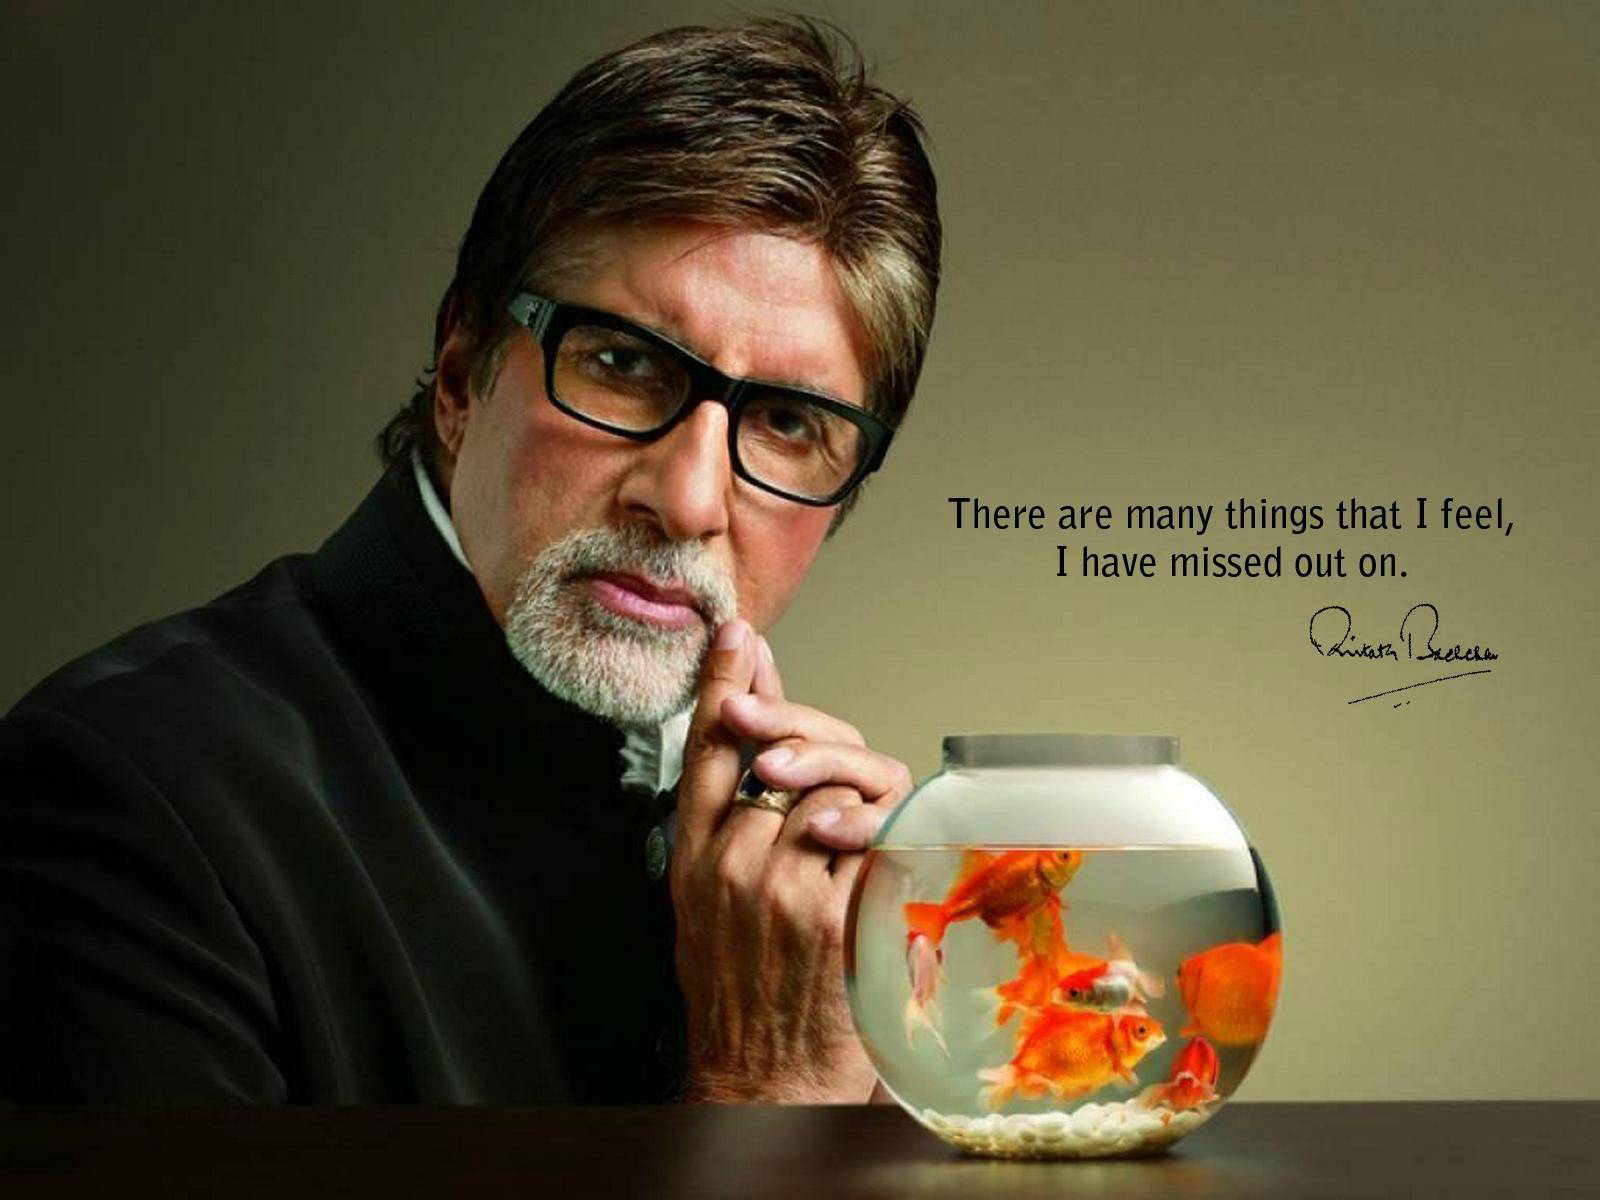 Amitabh Bachchan's quote